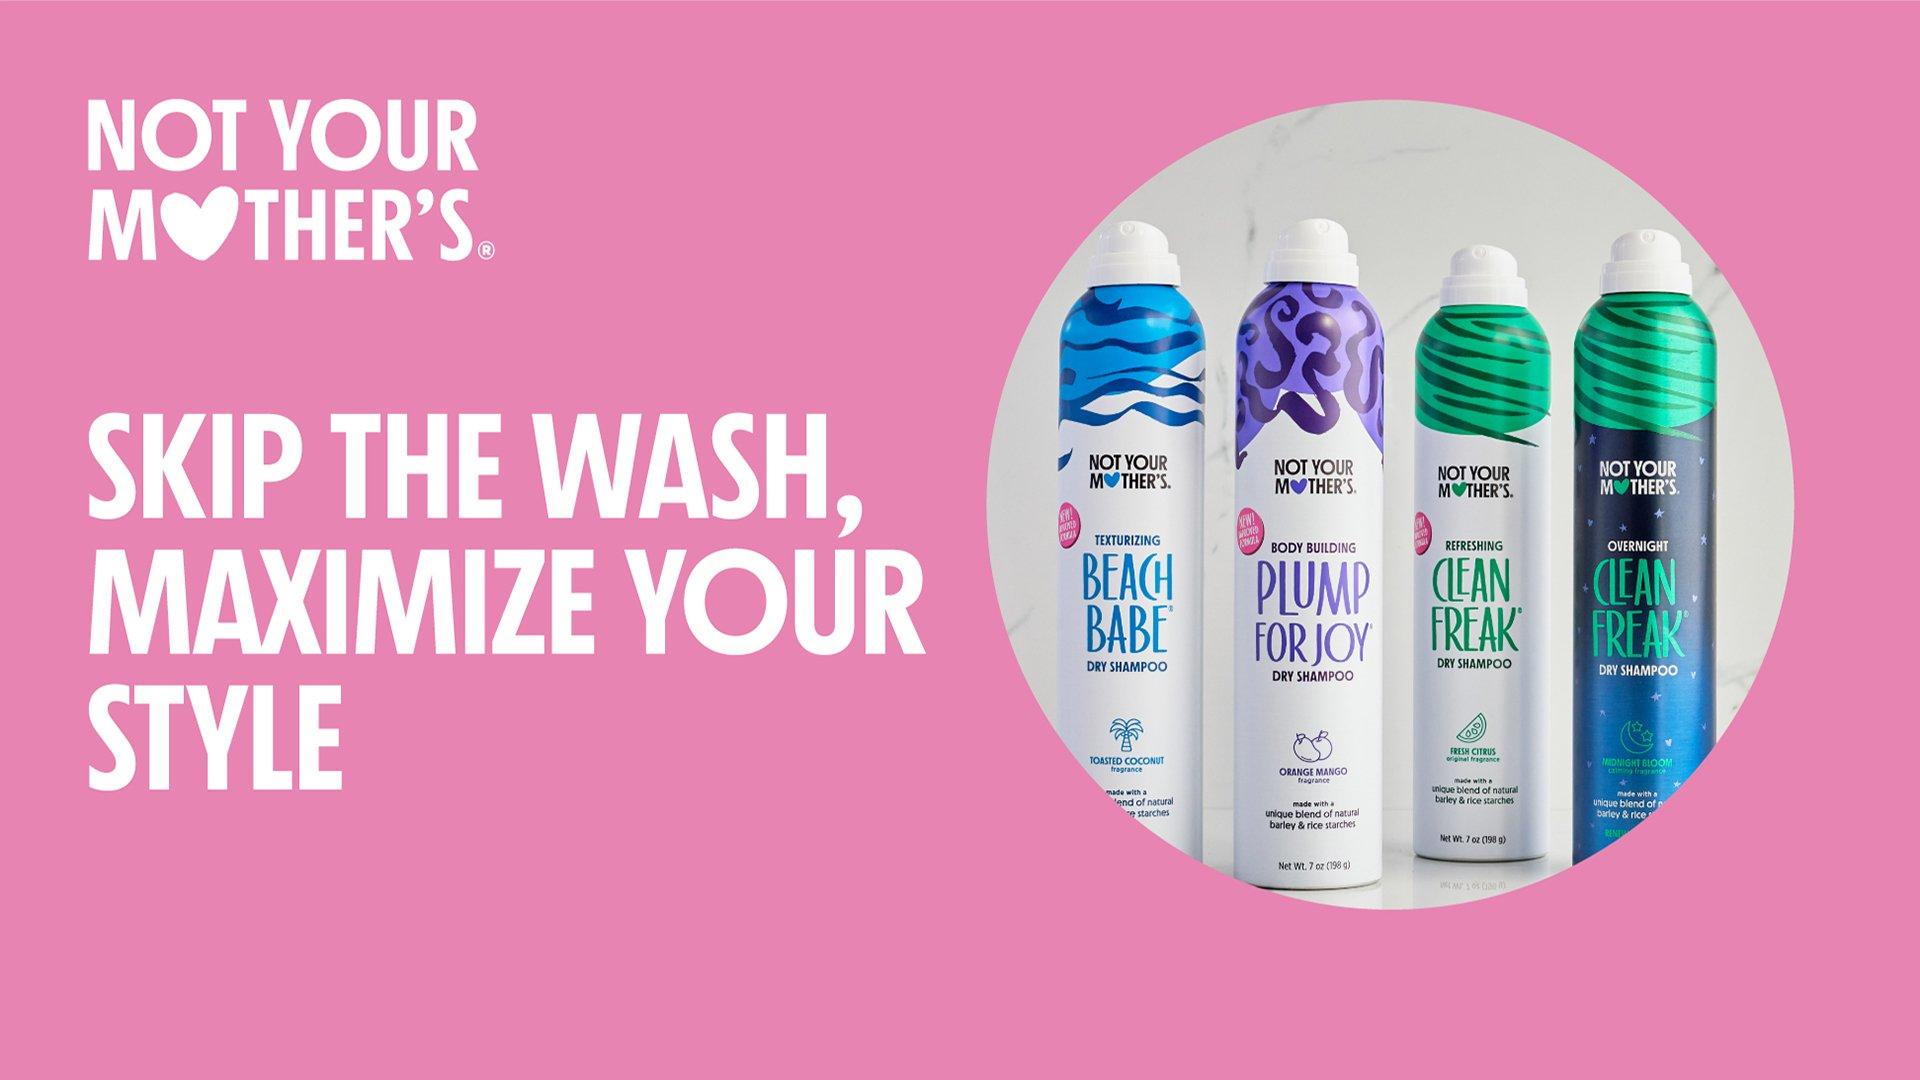 Not Your Mother's Clean Freak Dry Shampoo, Original, Refreshing - 1.6 oz